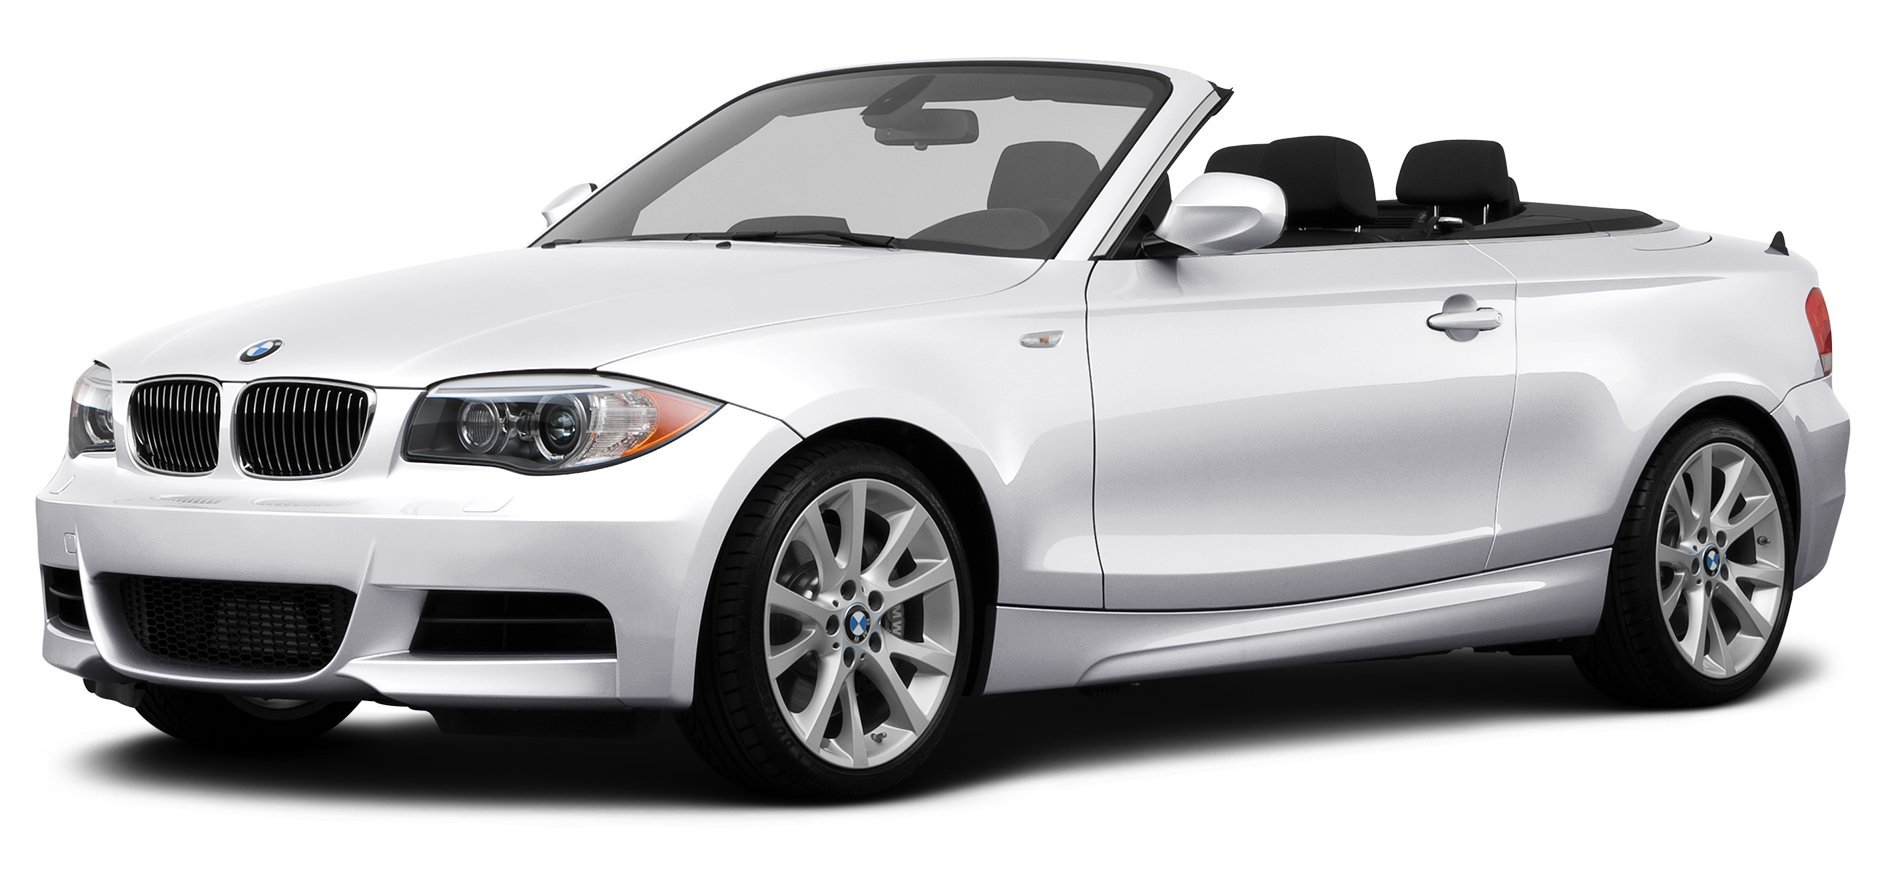  BMW 135I oem parts and accessories on sale